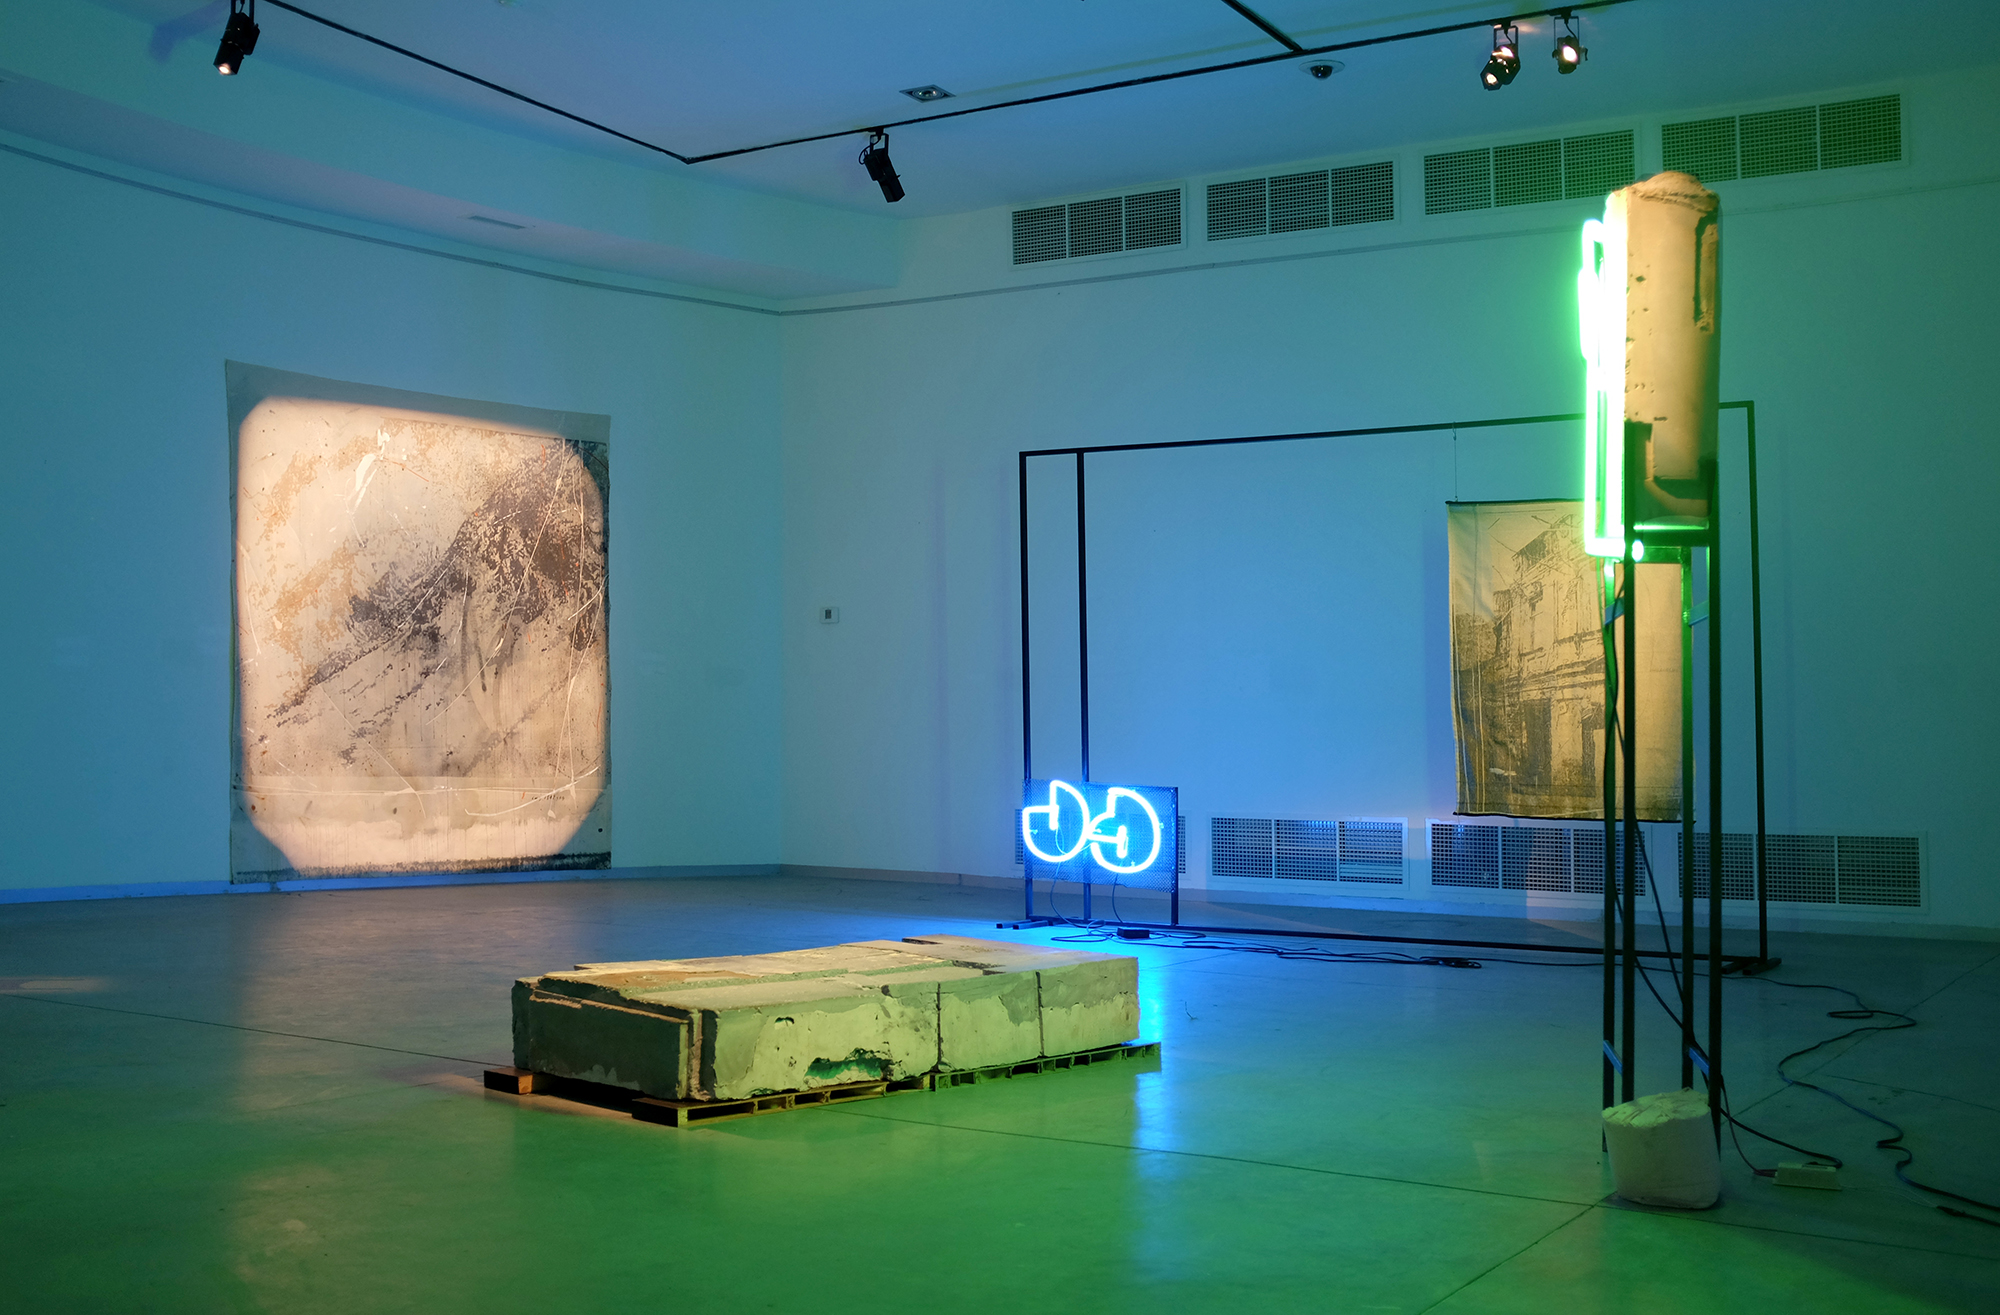 Here, 2017, Steel, jacquard weaved tapestries, pigmented plaster, neon, acrylic on canvas, wood, plywood, Dimensions variable.
Solo exhibition at The Georgian National Museum, Mestia. Installation view. Image courtesy the artist and The Georgian National Museum.
